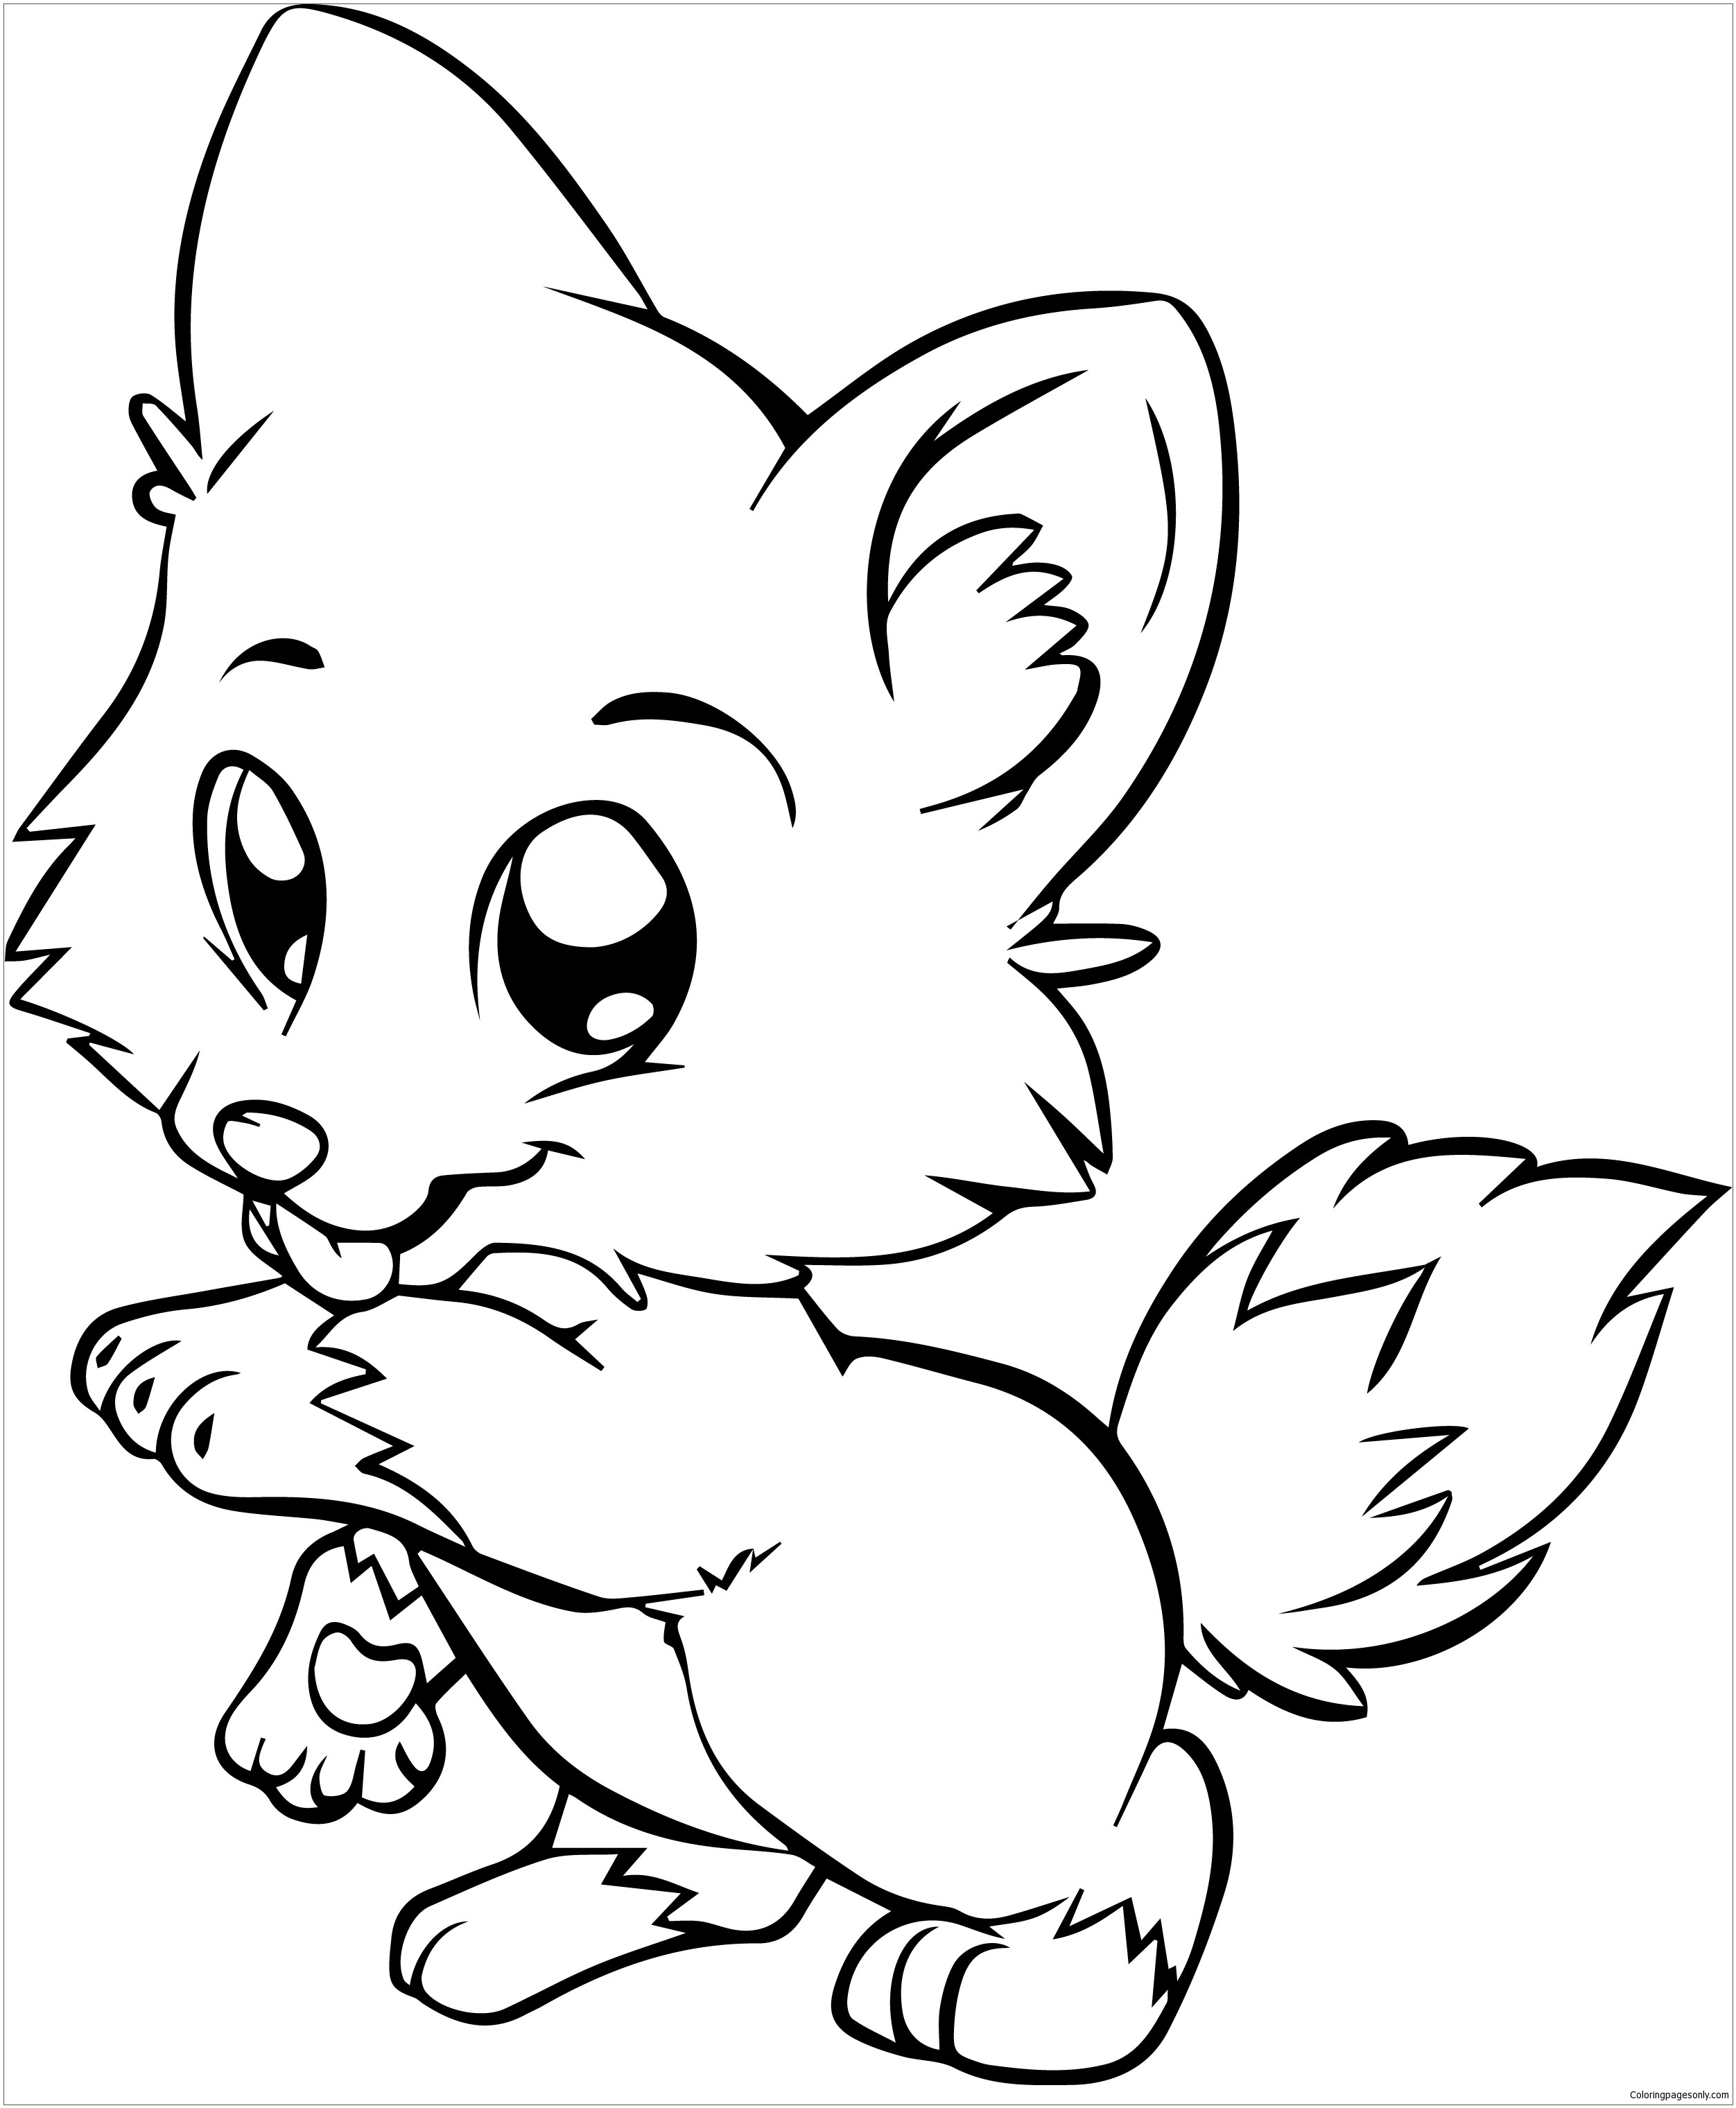 Baby Dog Coloring Page - Free Coloring Pages Online